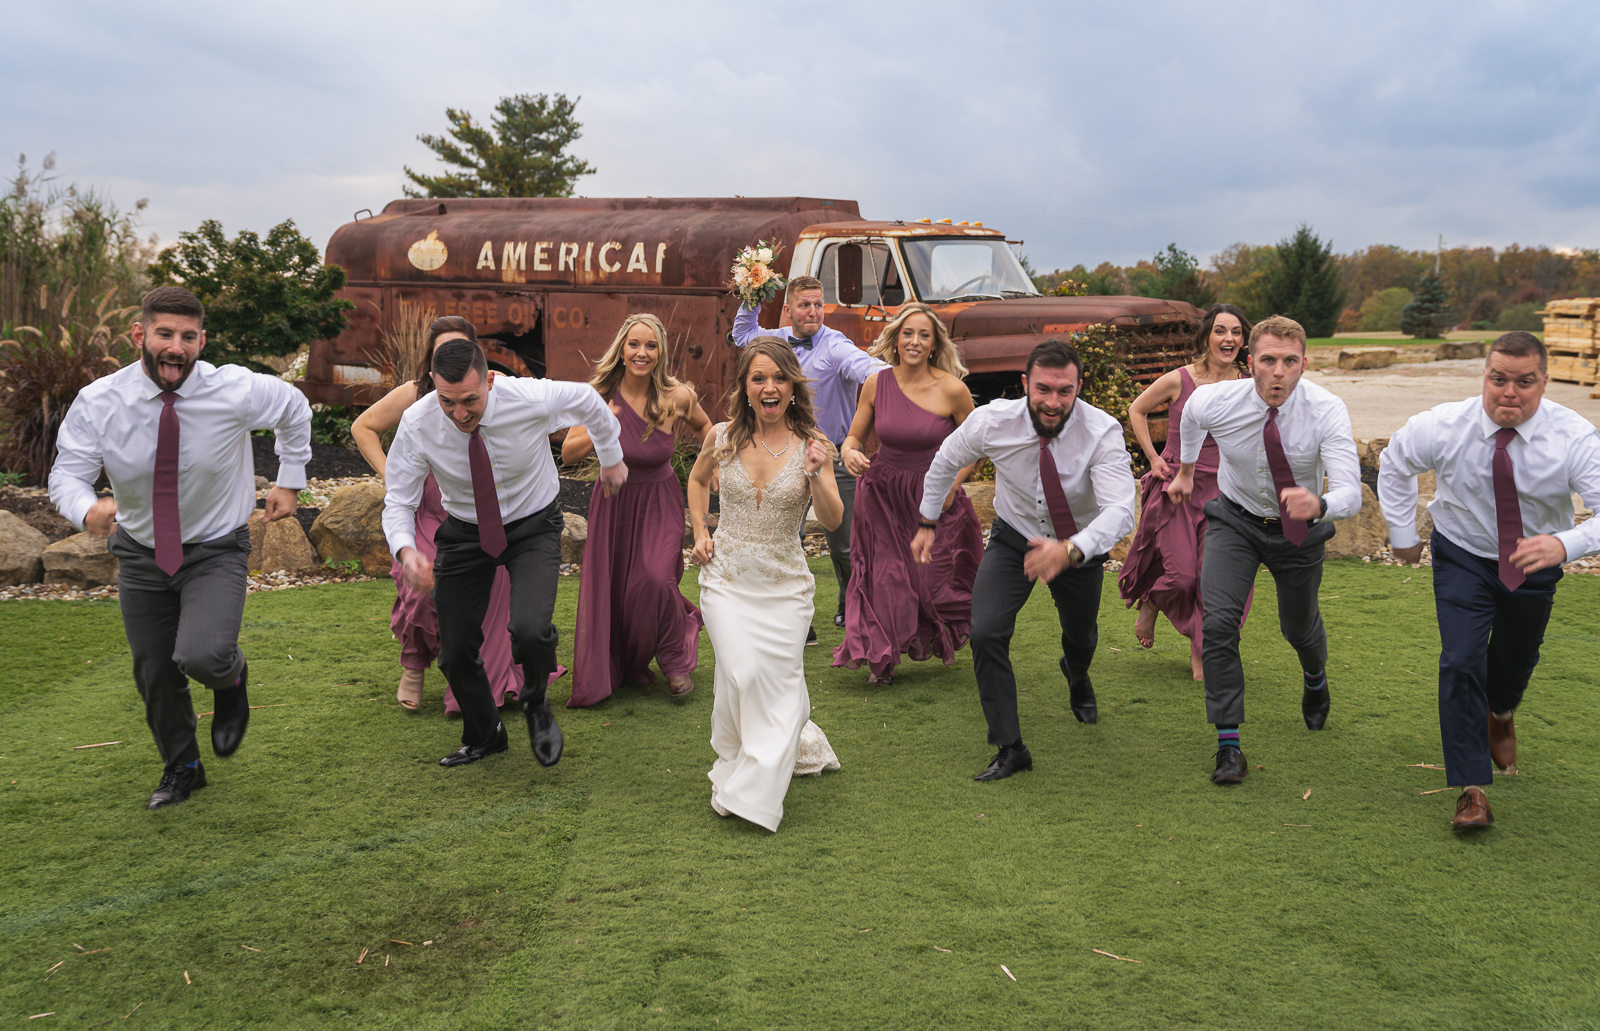 Bride and groom with bridal party, bridal party portrait, fun bridal party portrait, unique bridal party portrait, old truck, American oil, fall wedding, rustic outdoor wedding ceremony at White Birch Barn